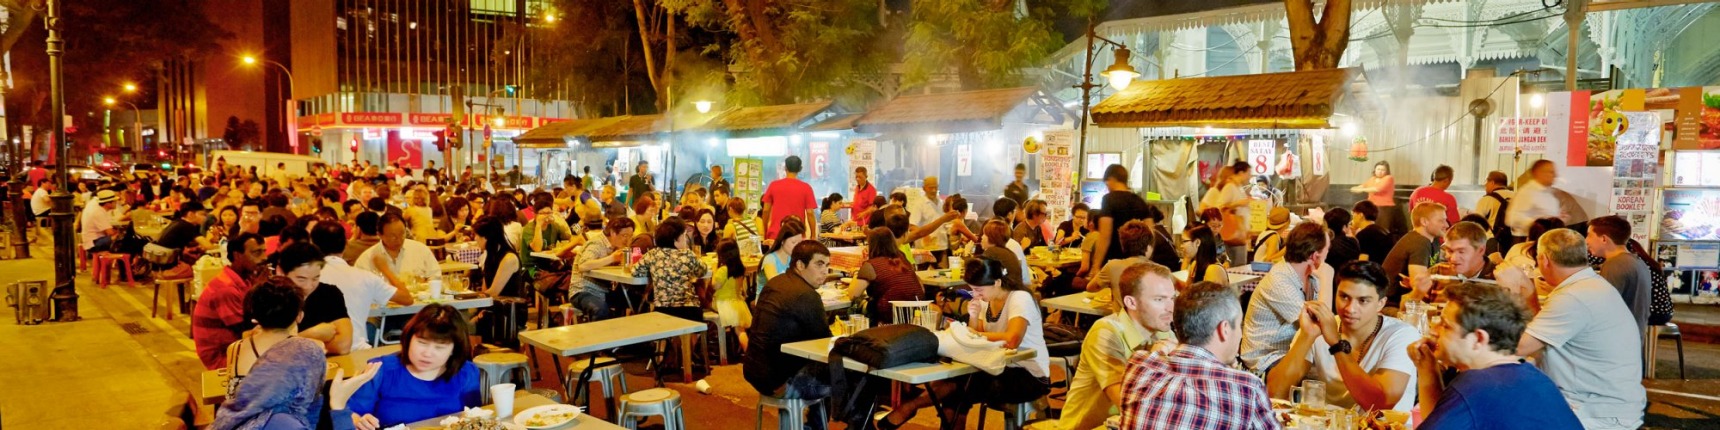 Singapore, Singapore: This is a city utterly bonkers about food - everyone has their favourite hawker centre, their ...